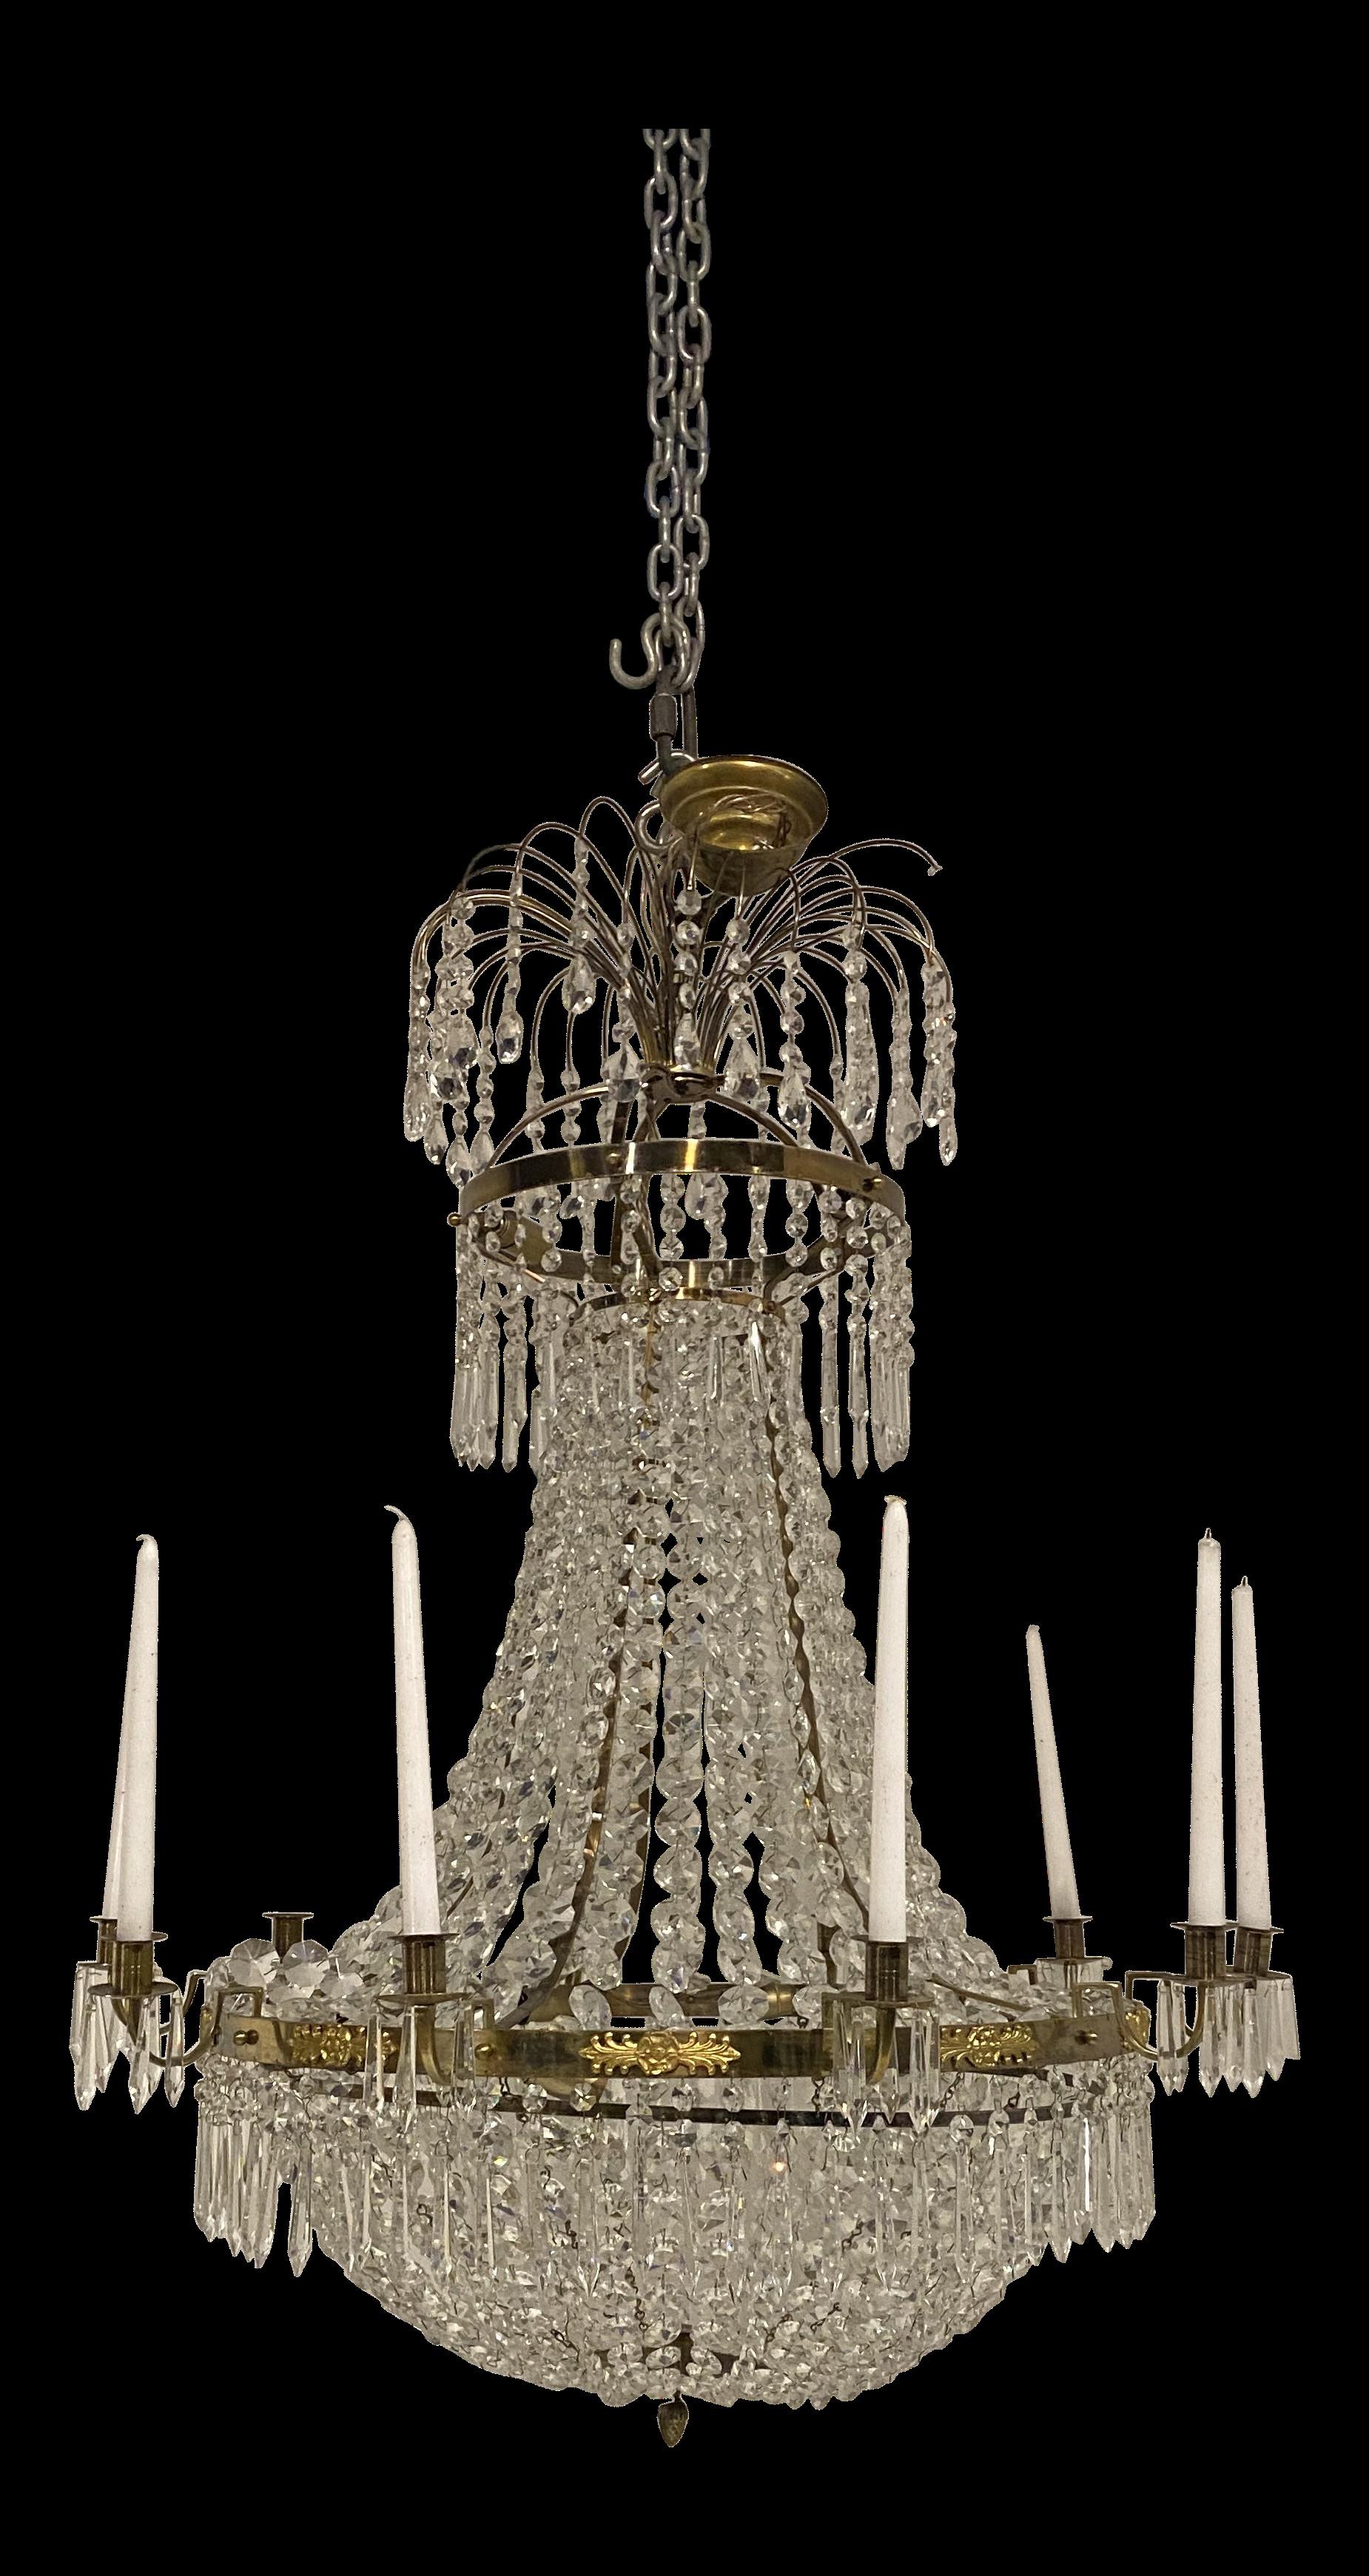 A circa 1900 Swedish Empire crystal chandelier with crystal hangings, 12 lights, newly rewire for the US